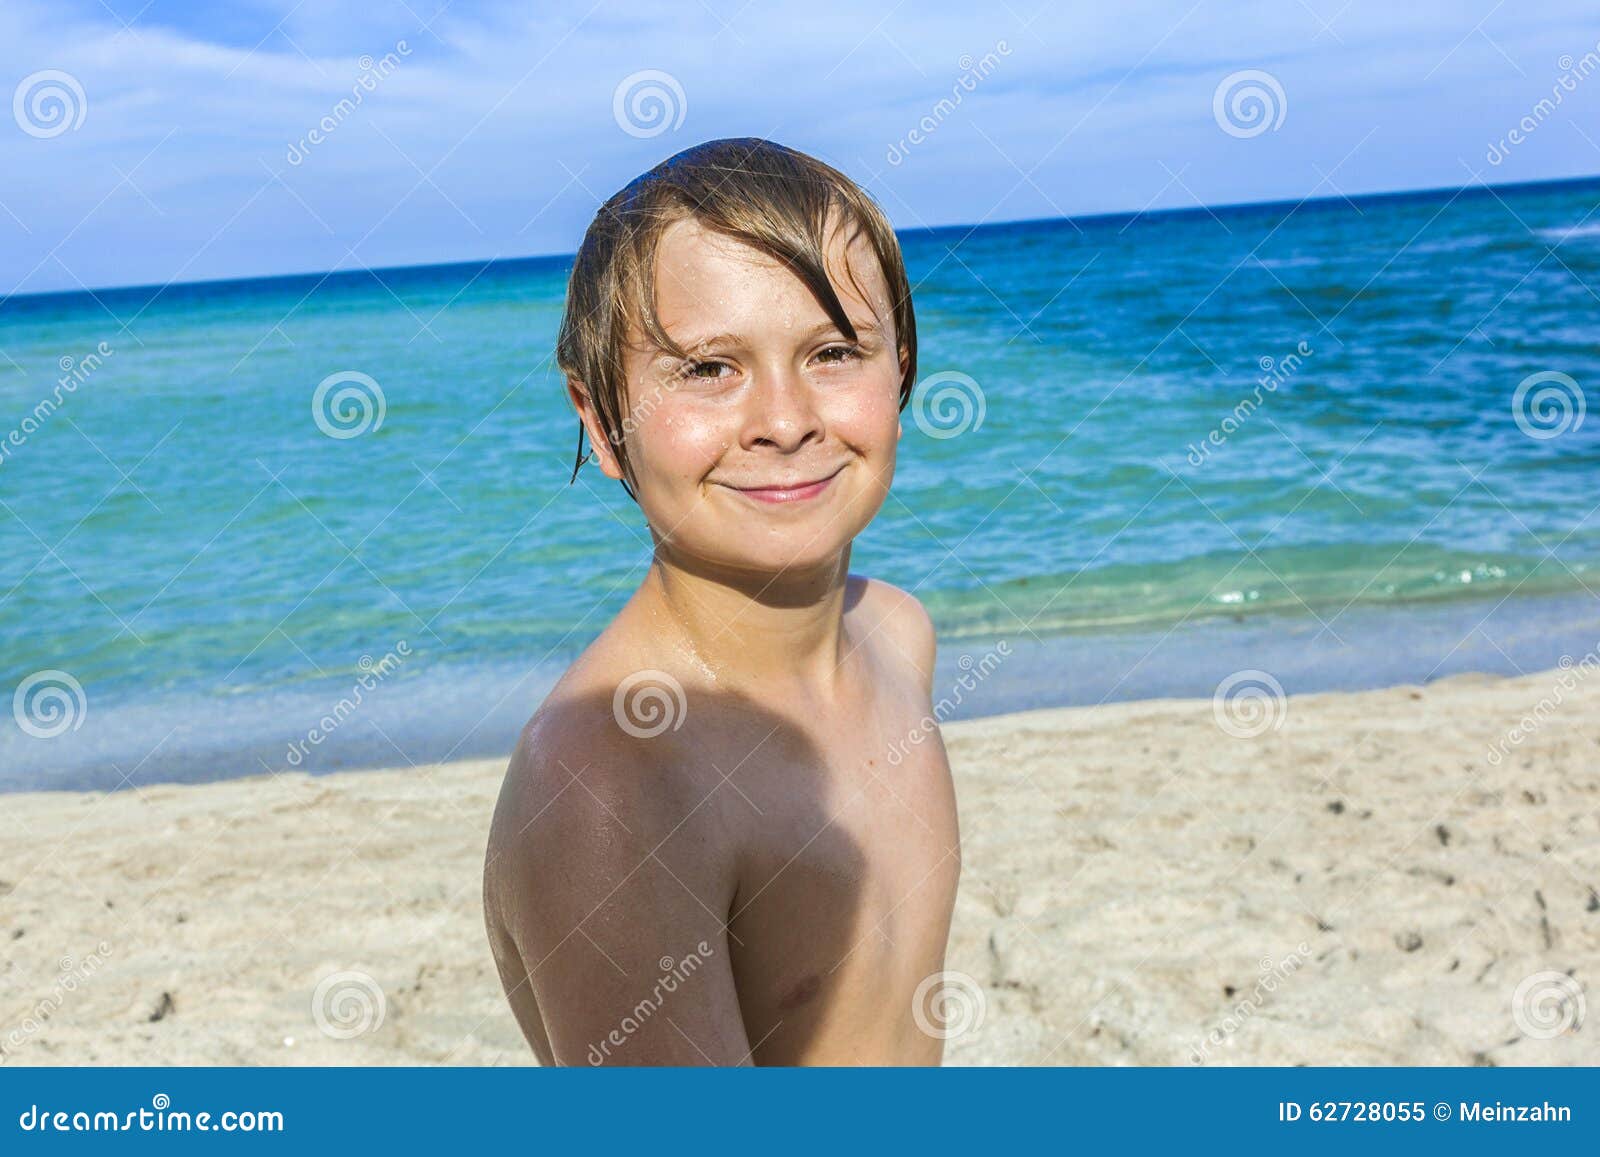 Young boy at the beach stock image. Image of outdoor - 62728055